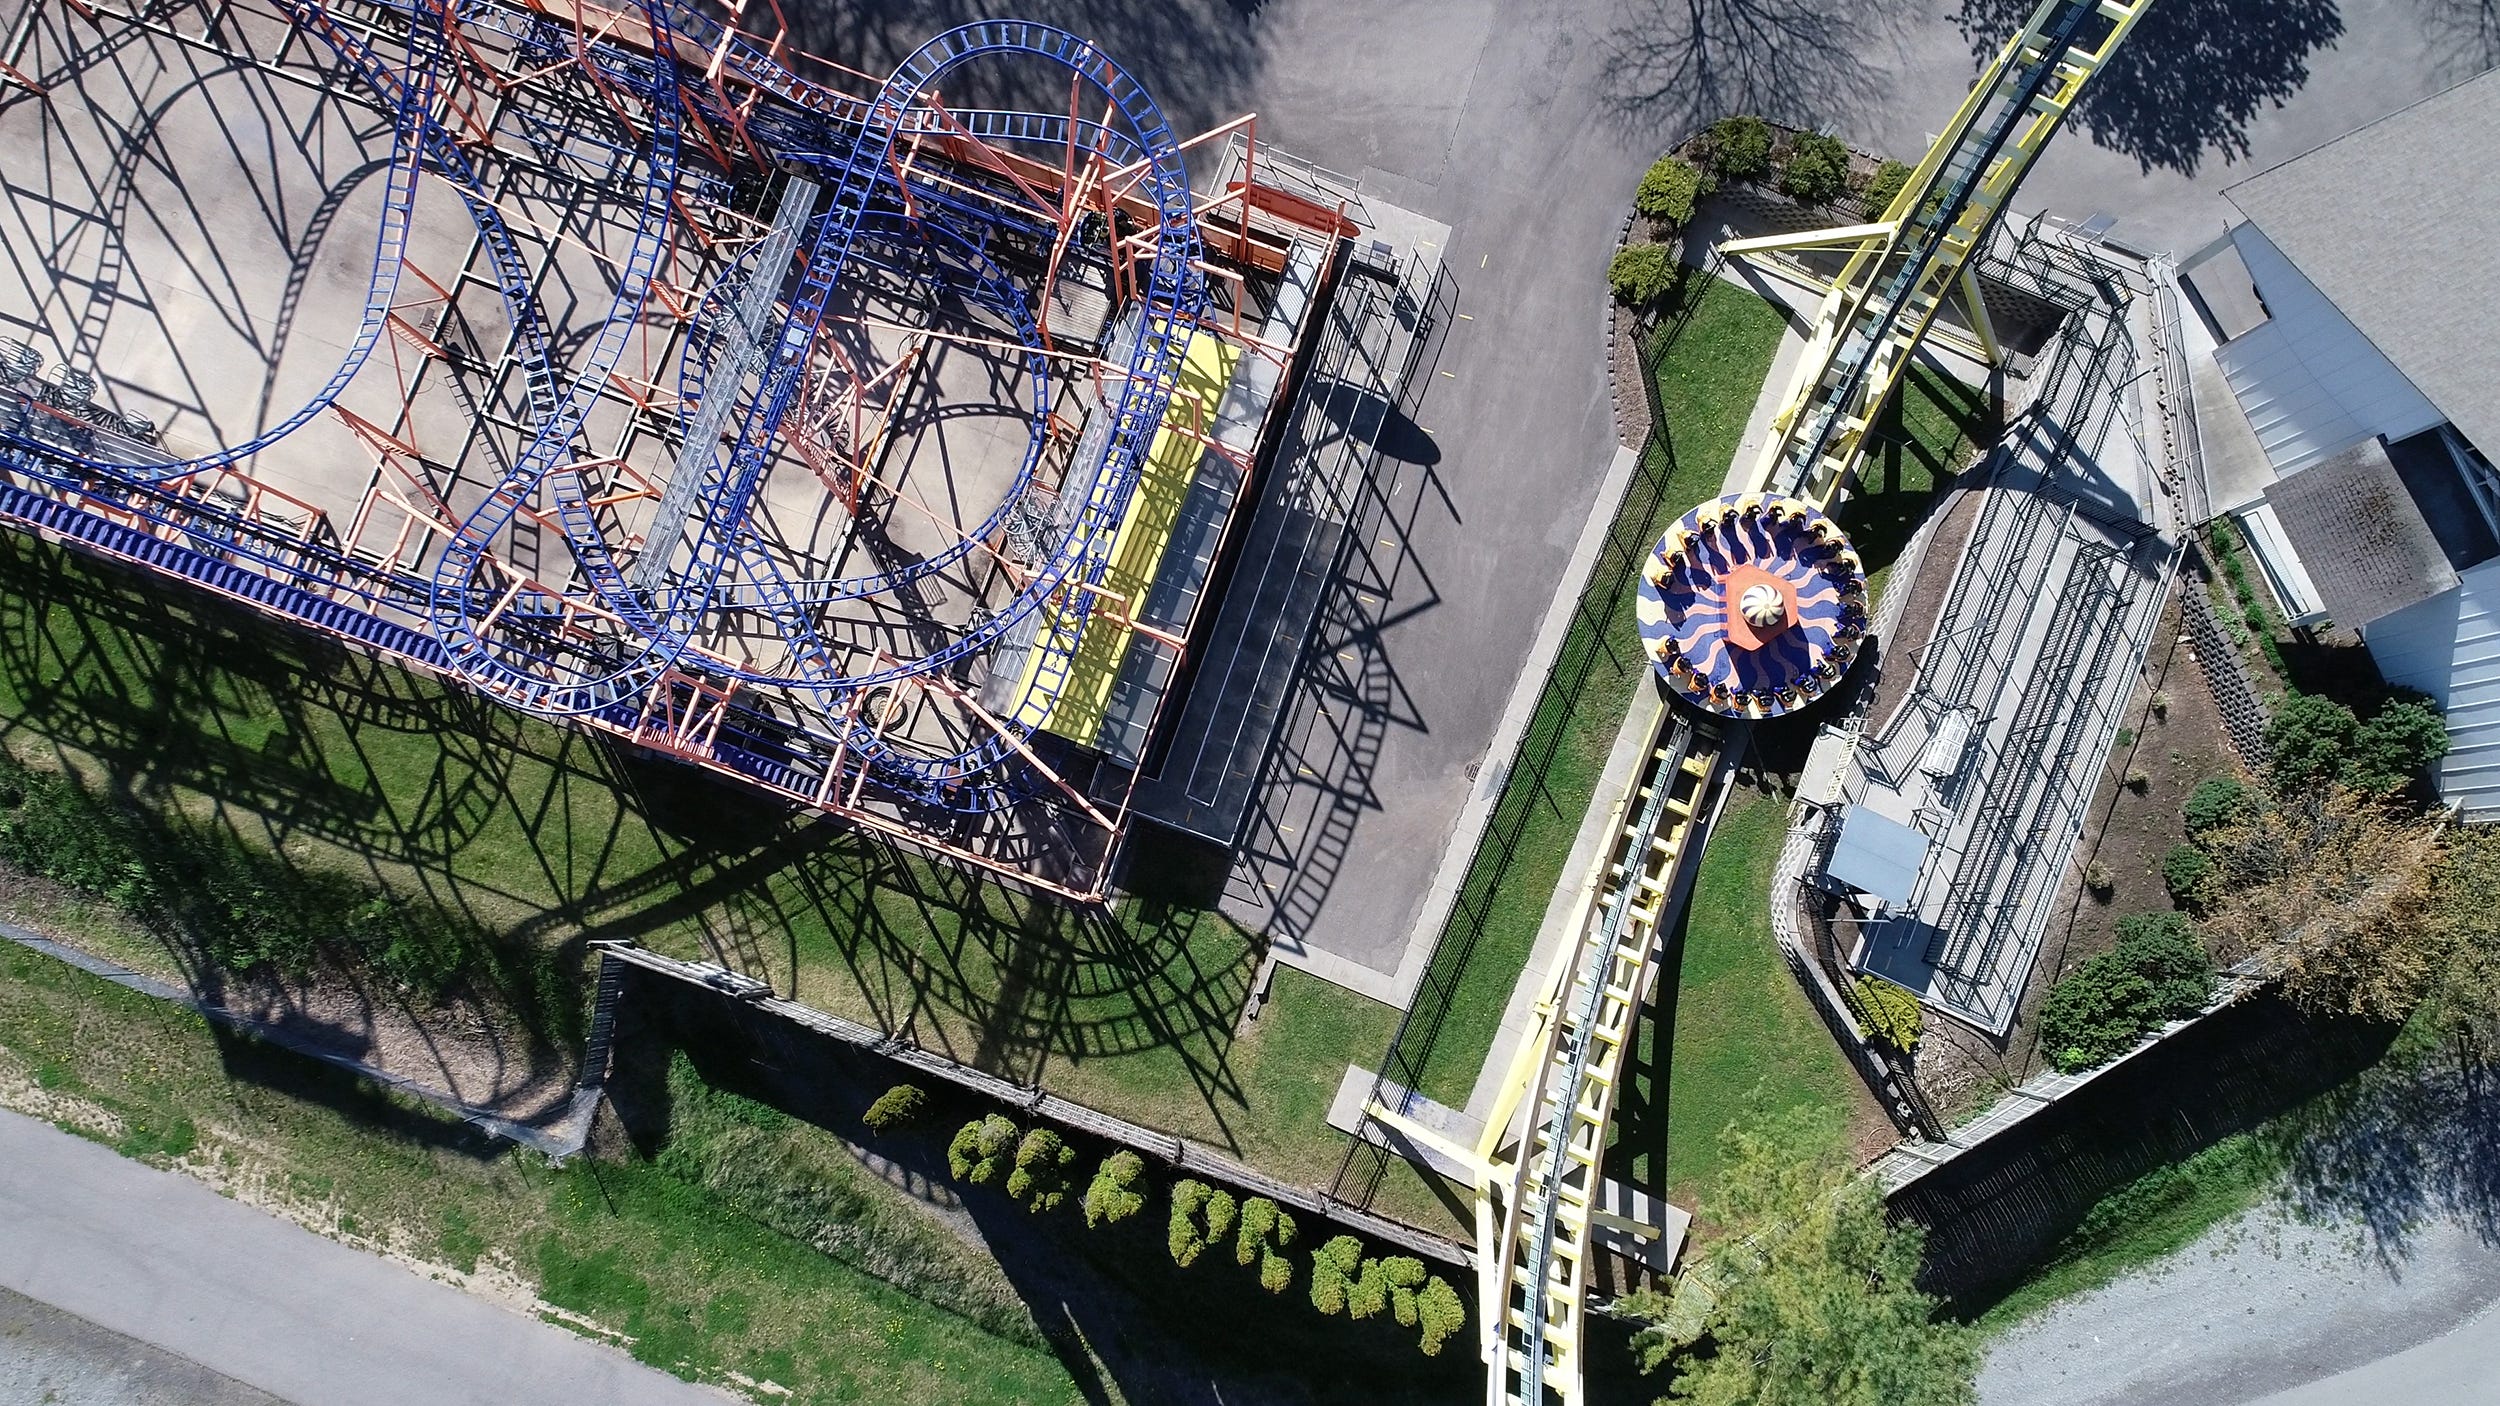 A view from above of the Whirlwind and Revolution 360.